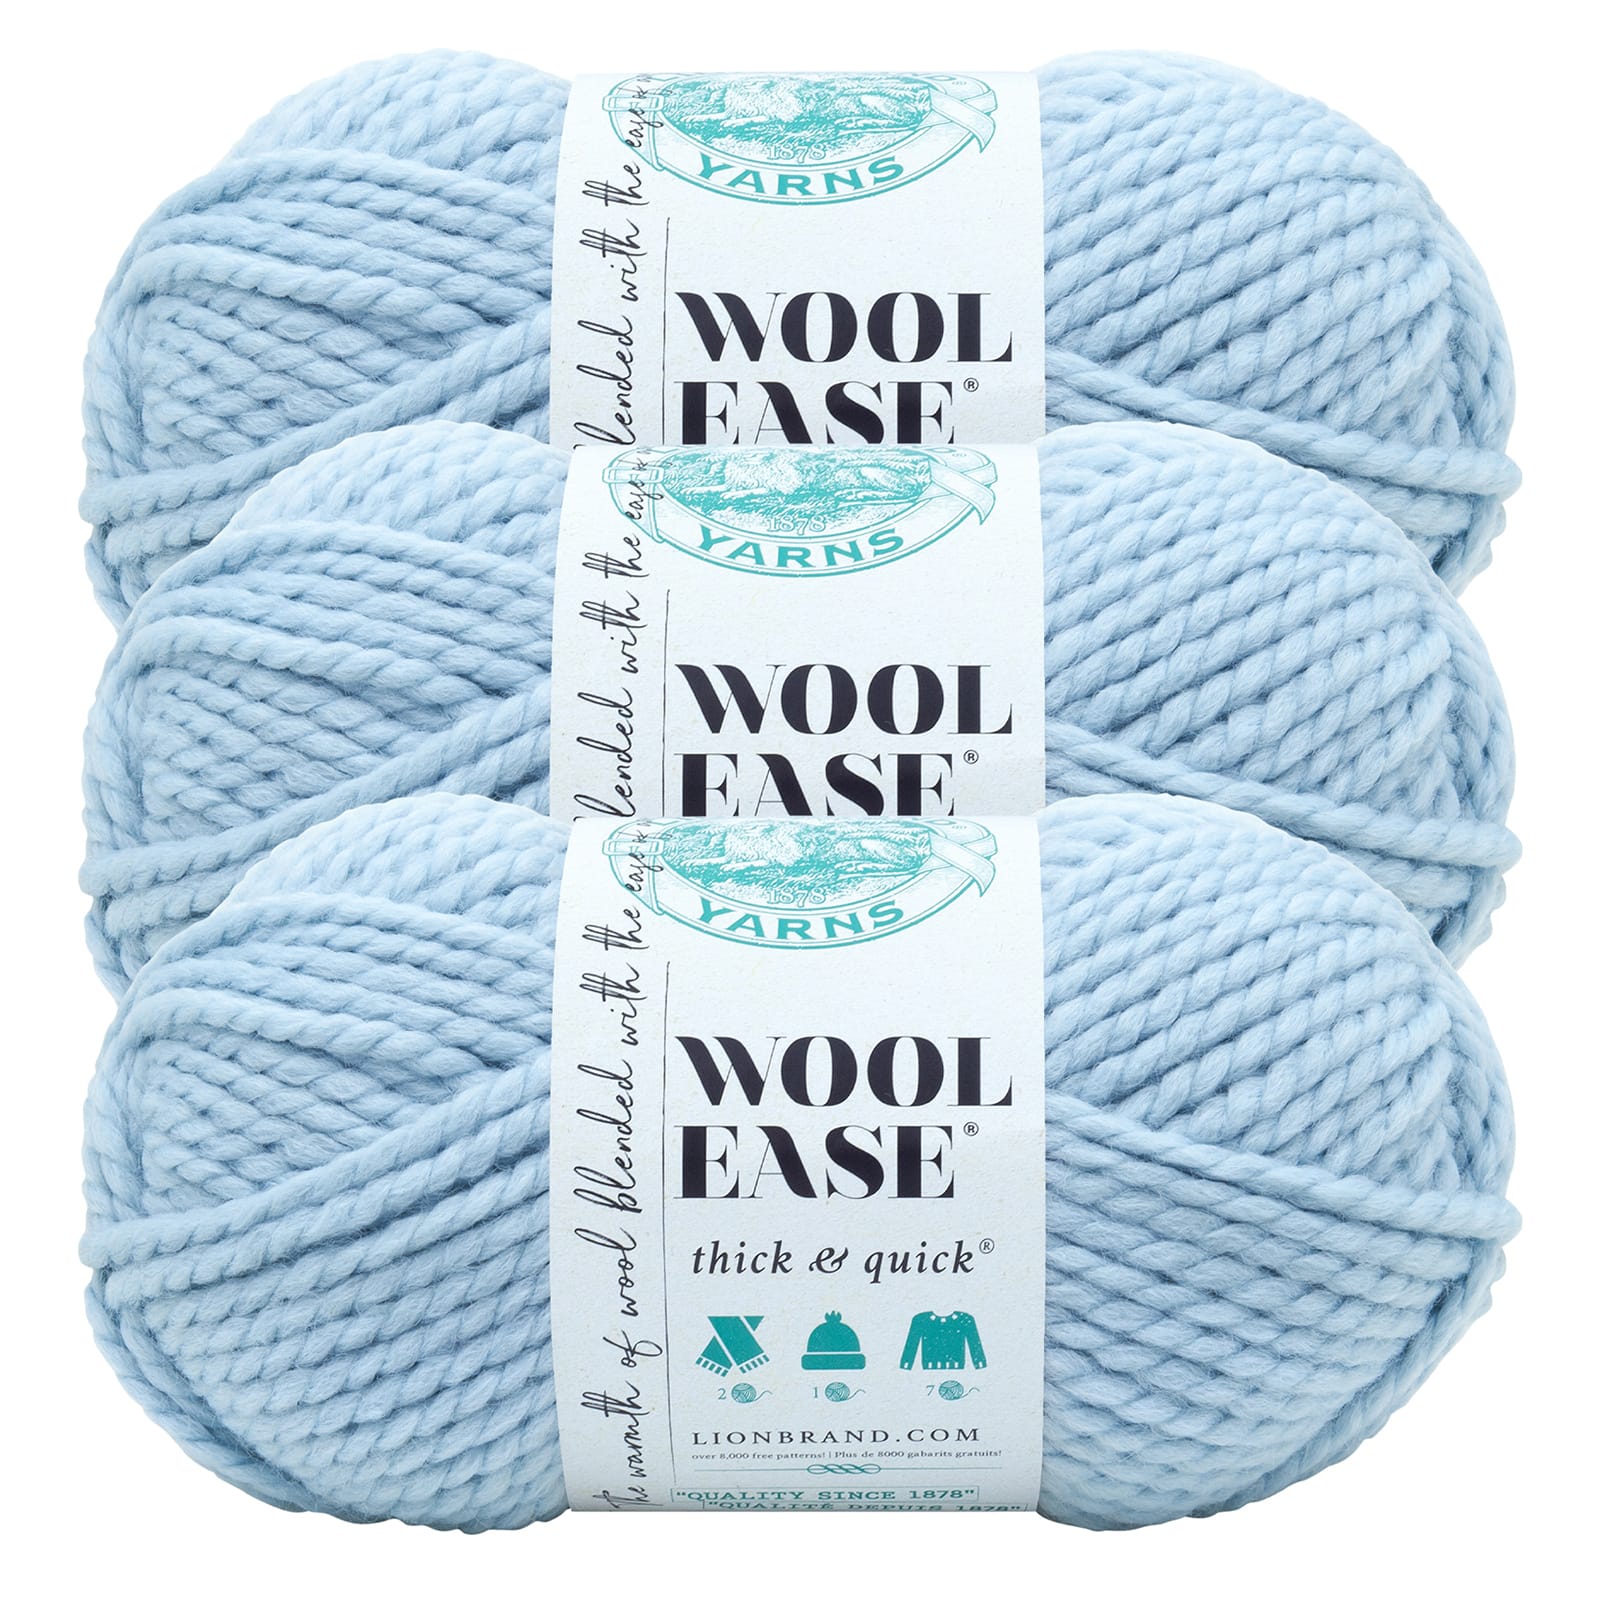 Lion Brand Wool-Ease Thick & Quick Yarn-Kale, 1 count - Kroger